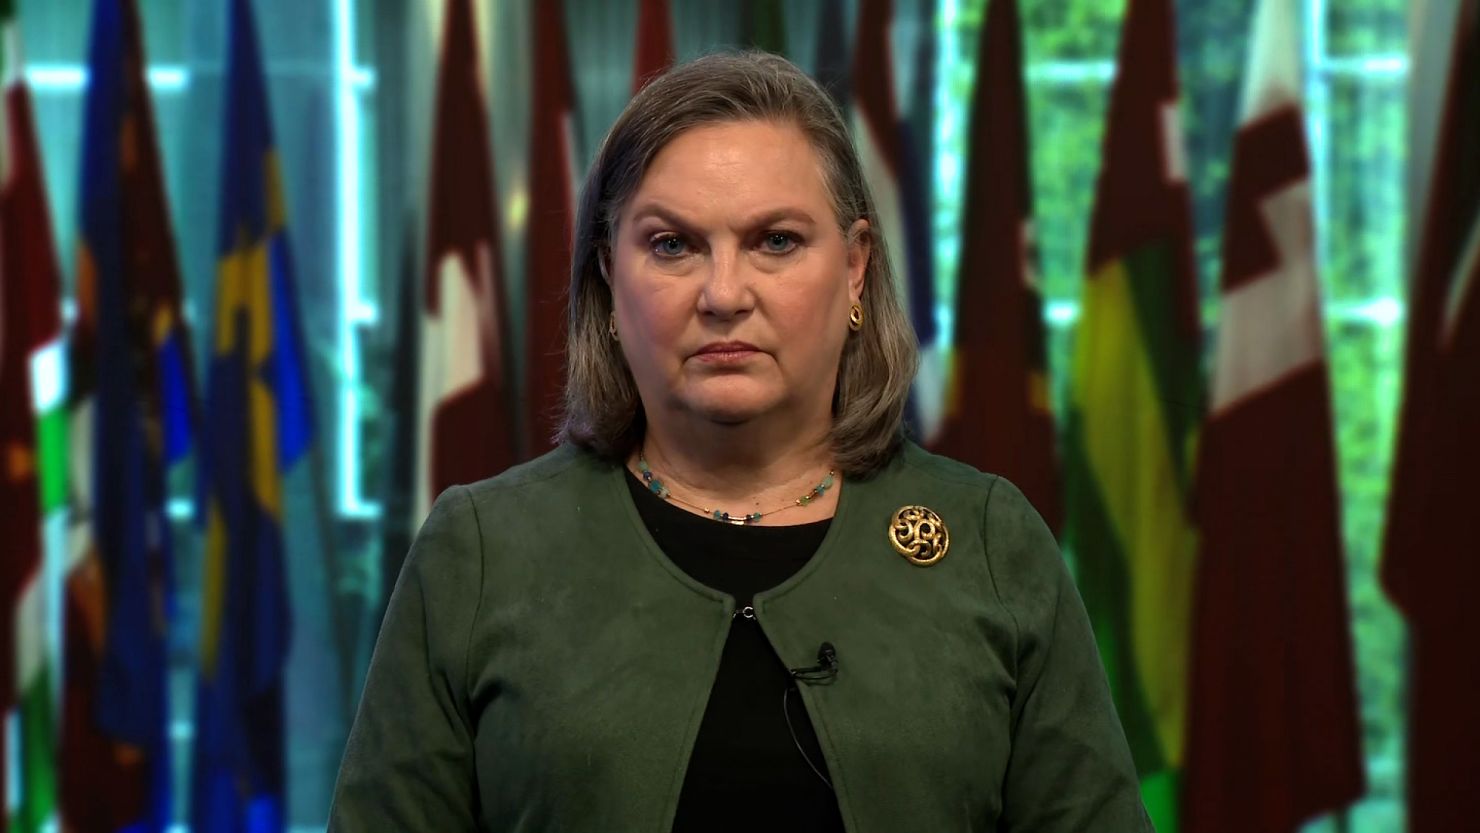 Victoria Nuland: Top State Department official to retire in coming